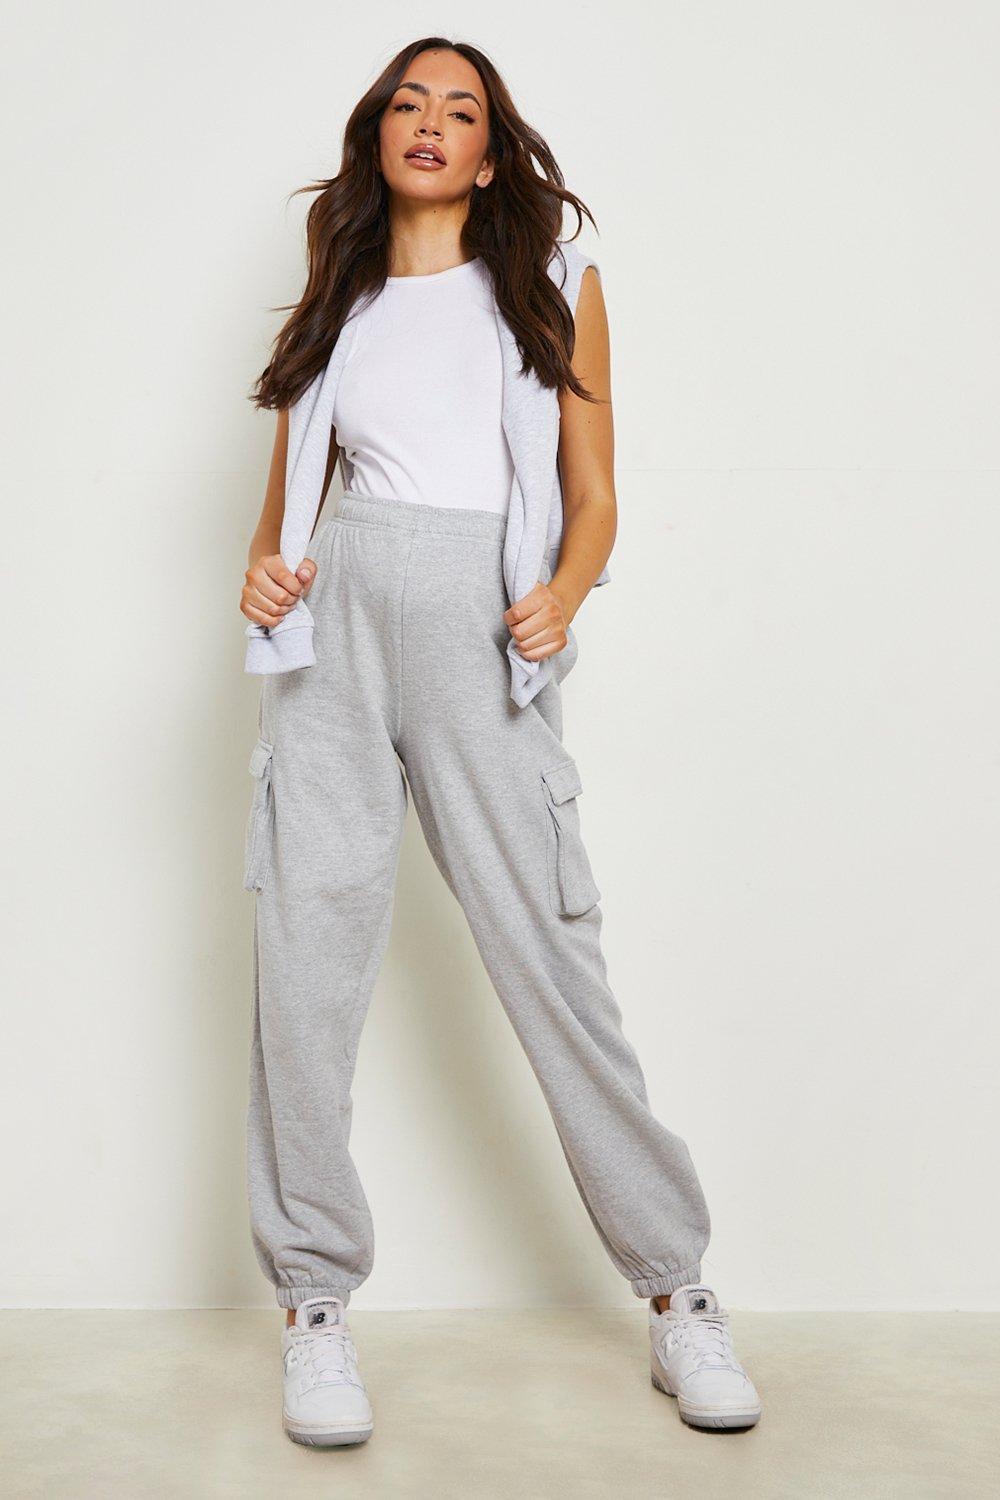 ASOS DESIGN Petite oversized jogger with pintuck in grey marl